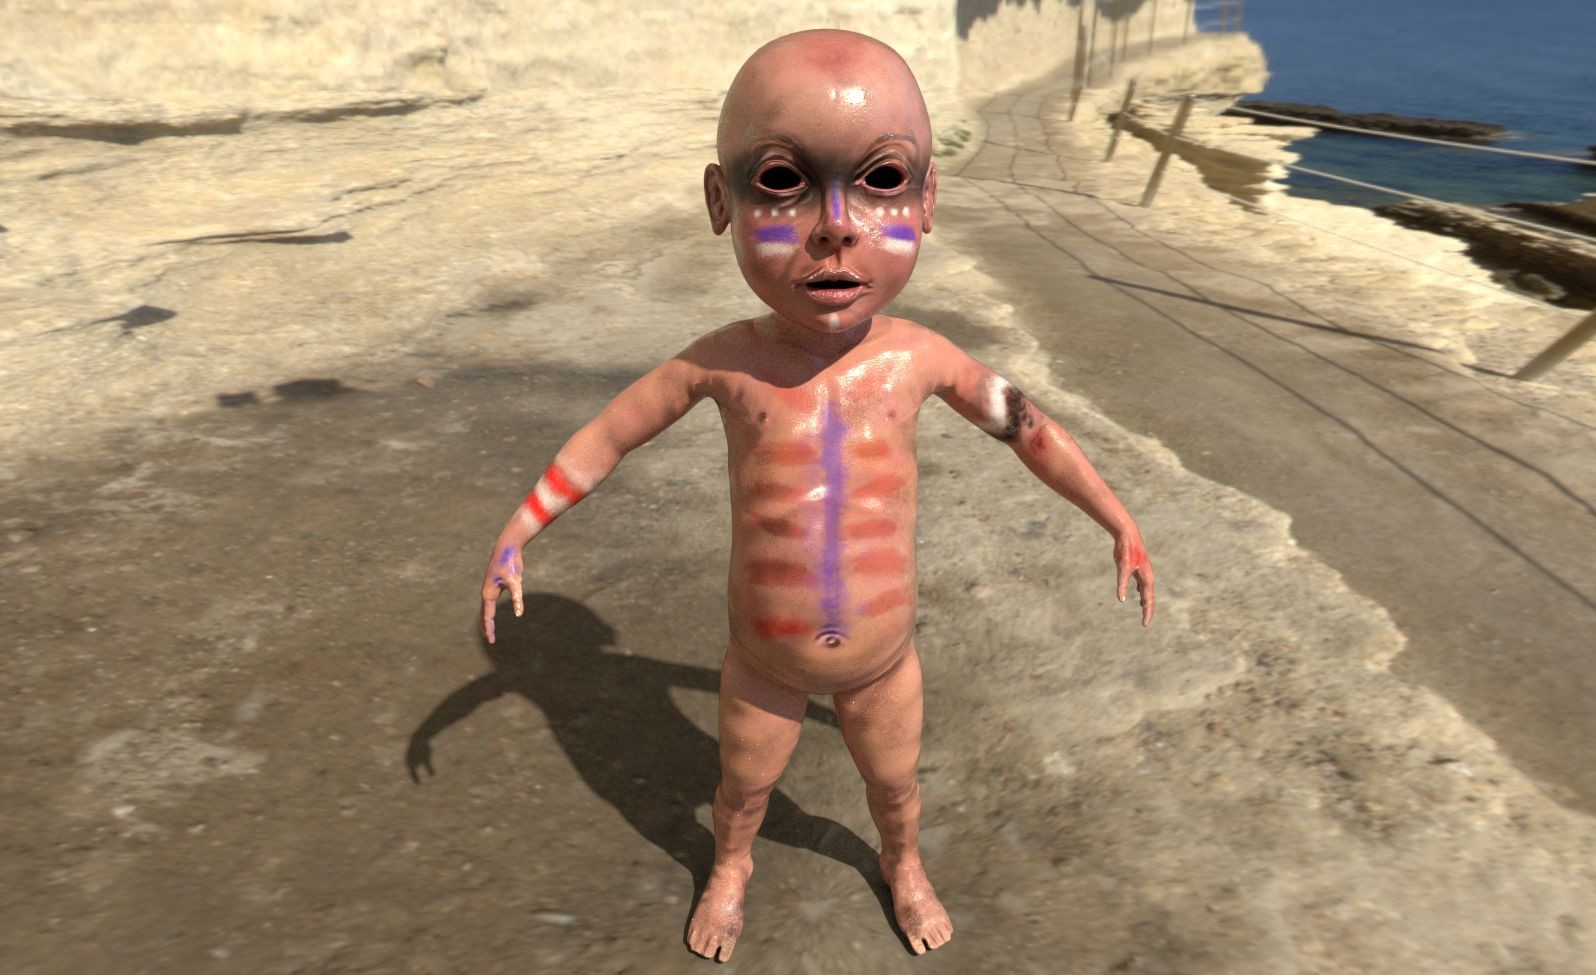 Basecolor of baby has been made in Zbrush, then I exported normal maps and base color maps, corrected them in Photoshop, sent to Substance painter for additional texturing, this is one of the tests.